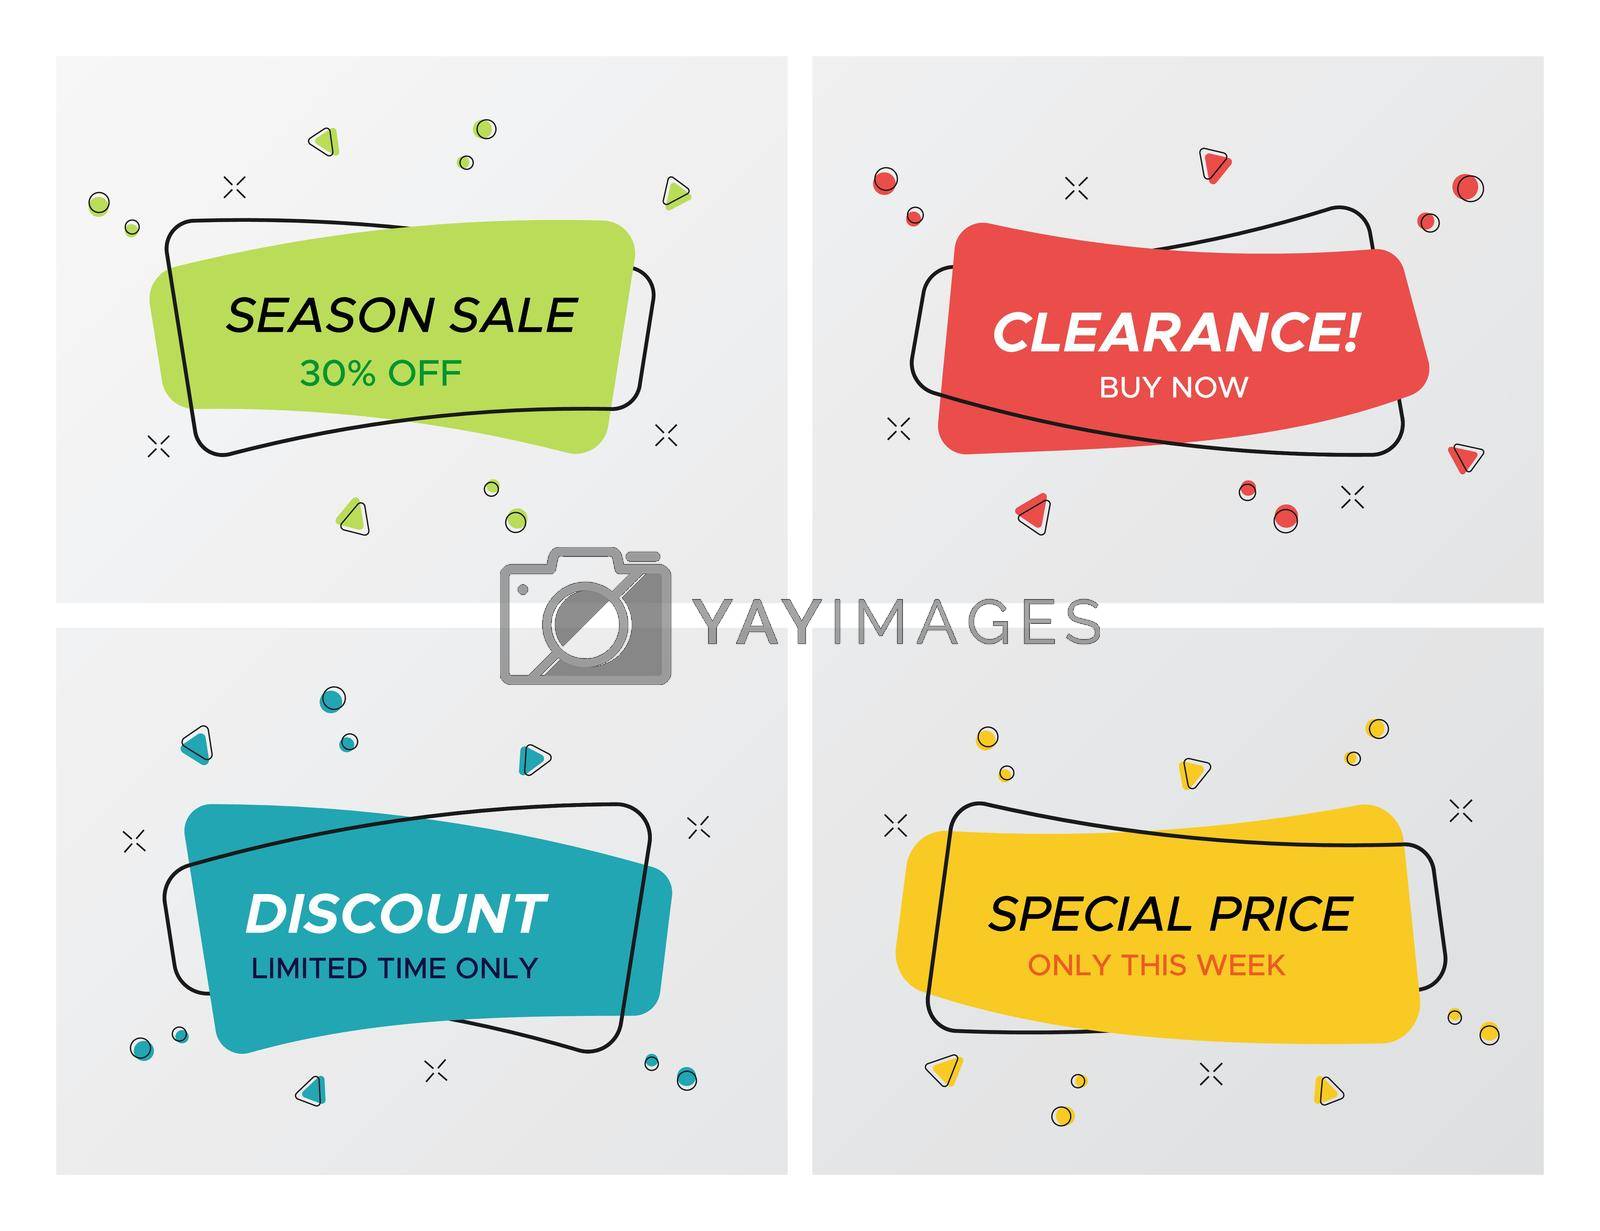 Royalty free image of Confetti blast rectangle promo sale tag collection by moonnoon